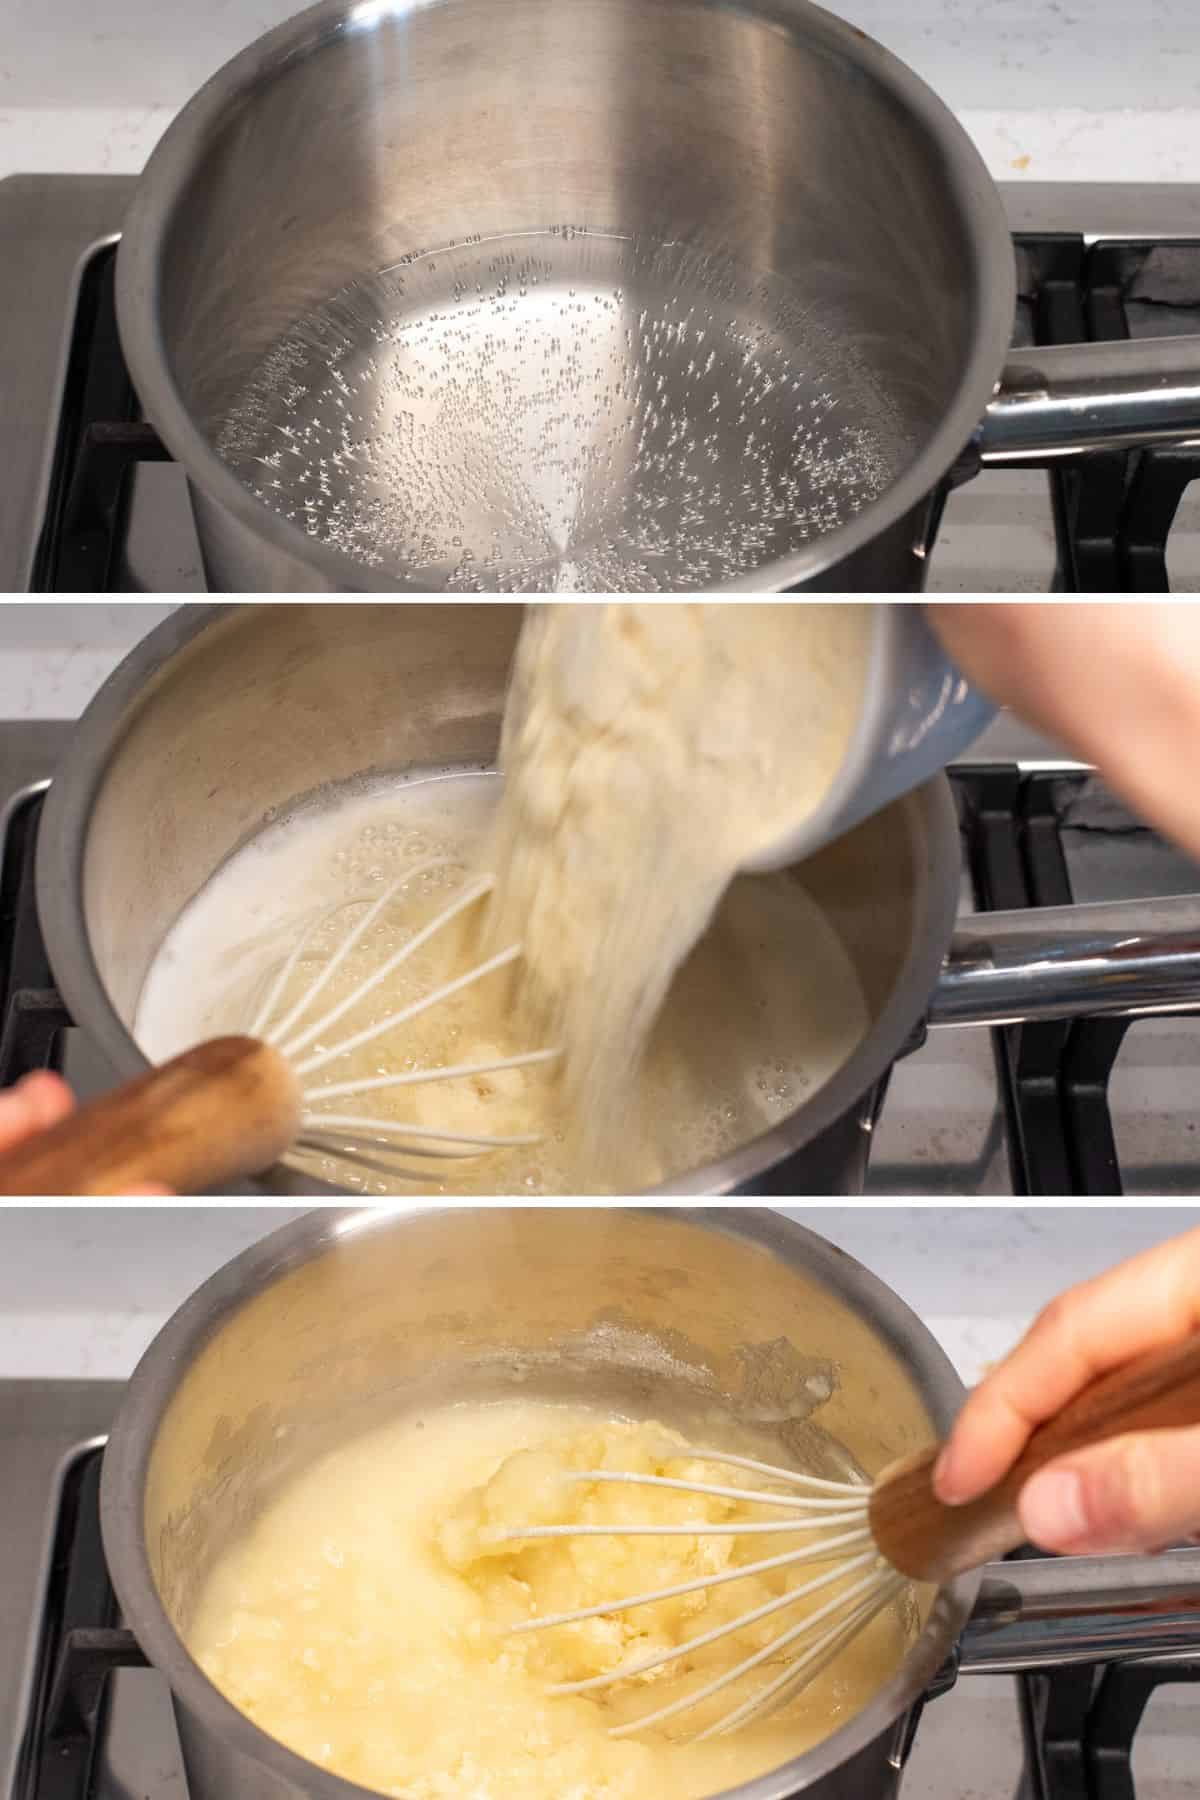 Cooking semolina from the cream filling.